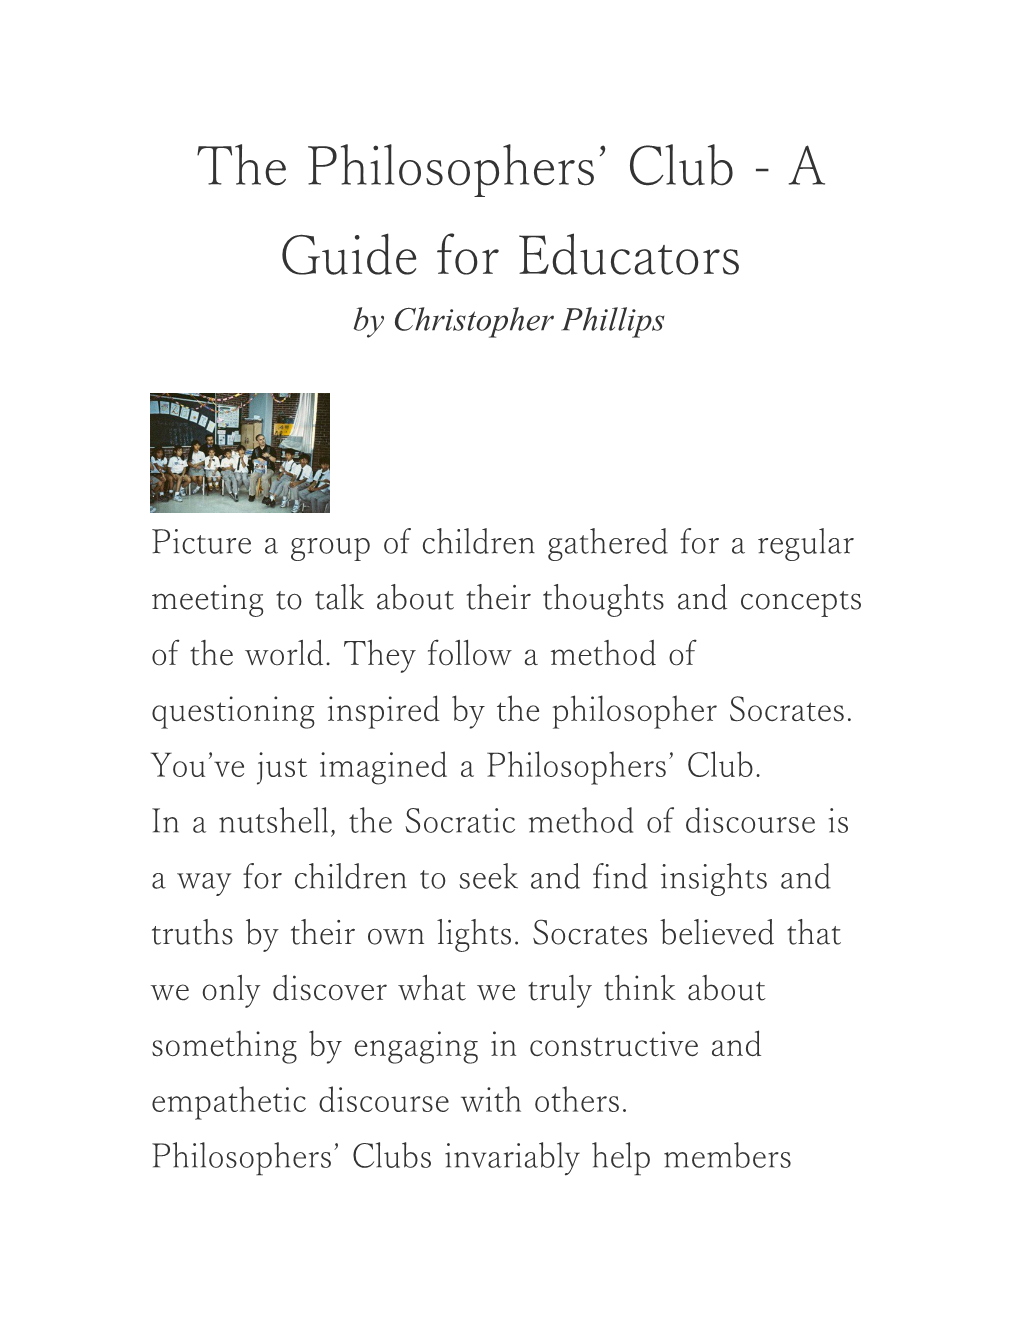 The Philosophers Club - a Guide for Educators